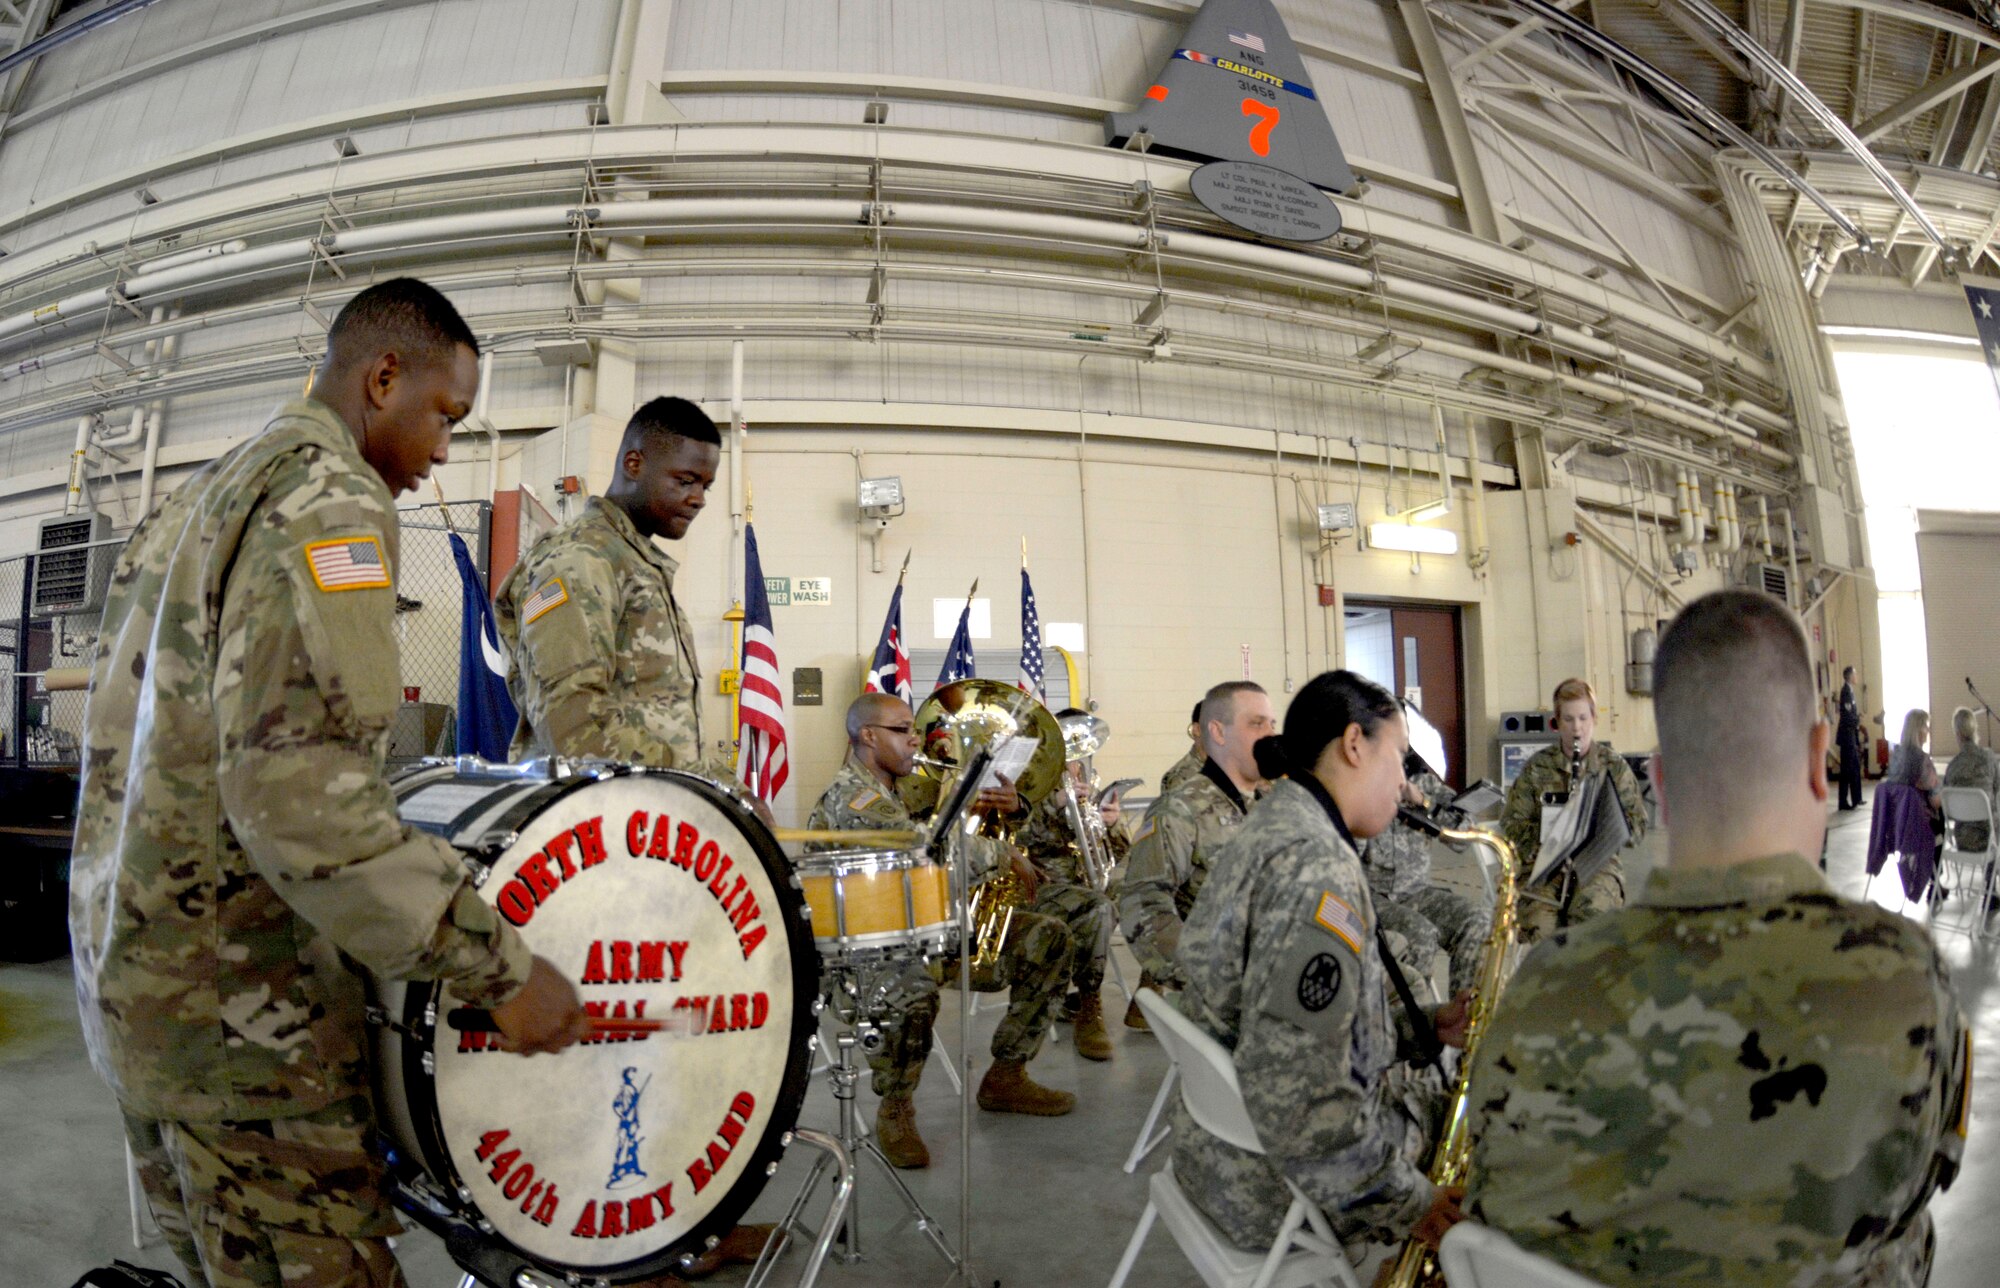 The 440th North Carolina Army National Guard Band perform various ceremonious pieces during a change of command ceremony held at the North Carolina Air National Guard Base, Charlotte Douglas International Airport, Oct. 1, 2016. (U.S. Air National Guard photo by Staff Sgt. Laura J. Montgomery)